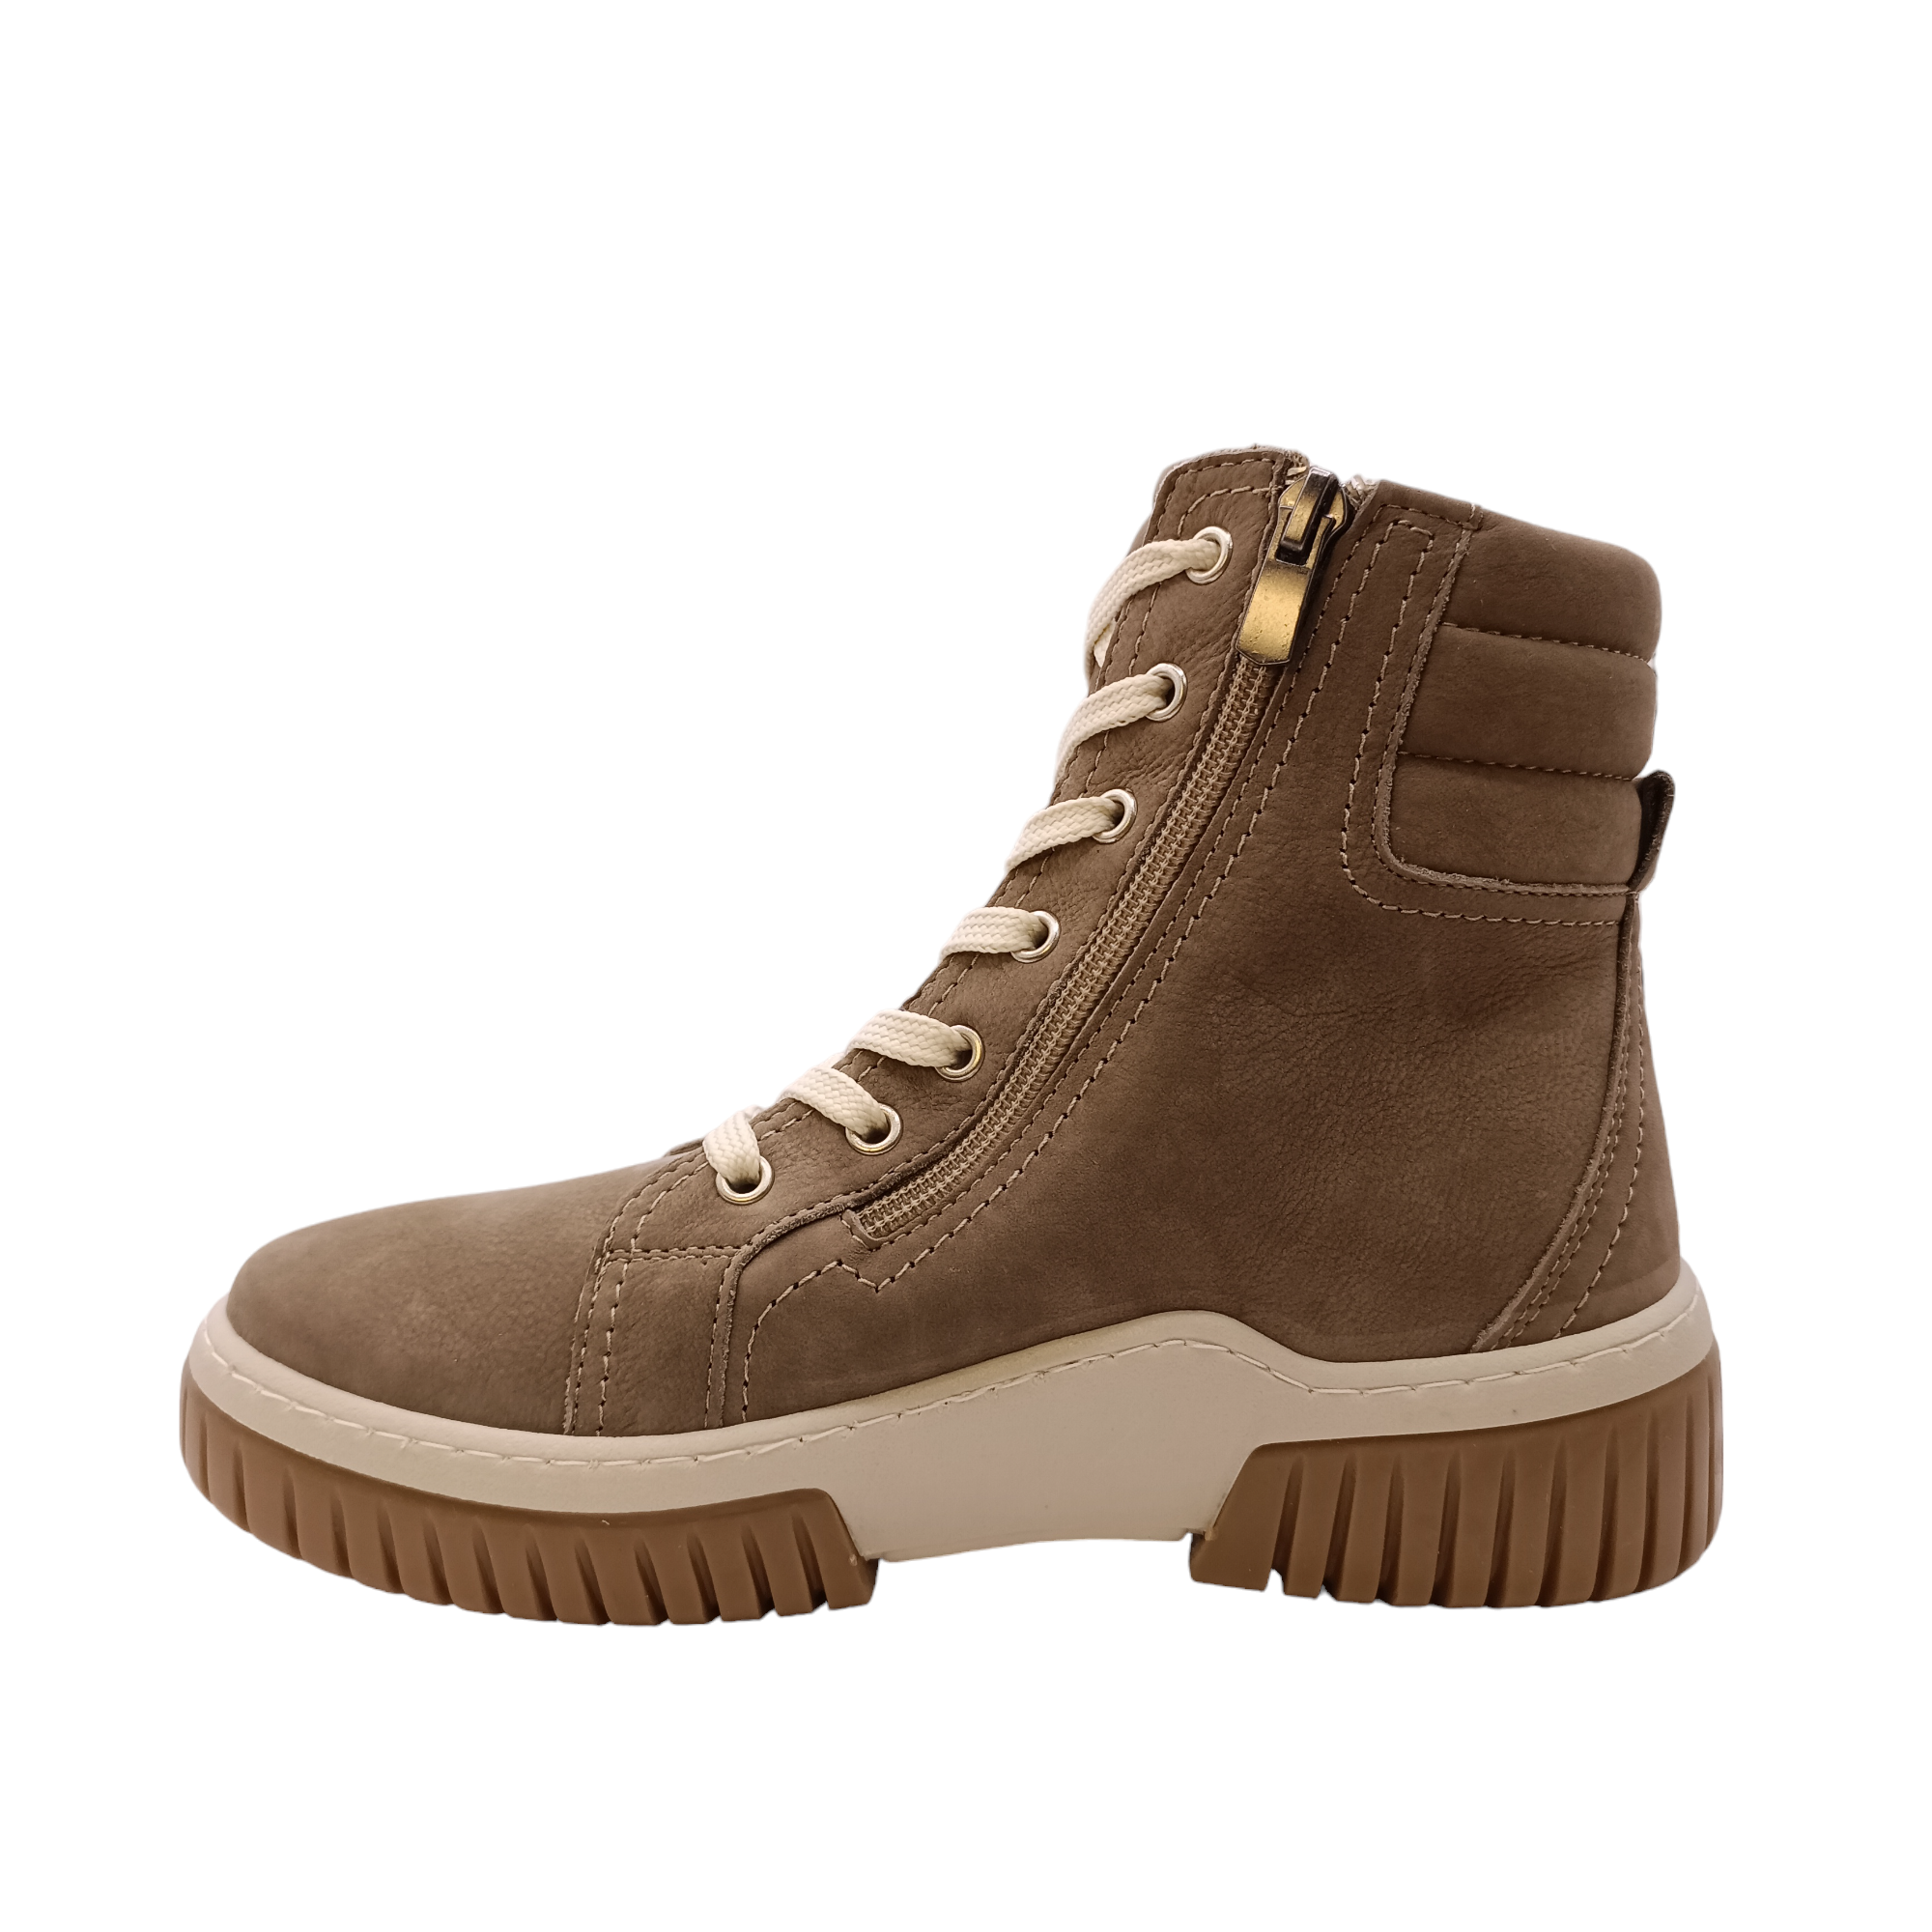 Side view of the boot Petra from Cabello. Soft Turkish taupe coloured leather boot with side zip and light coloured sole and laces. Padded ankle with ruggered grip. Shop Womens Boots Online and In-store with shoe&amp;me Mount Maunganui Tauranga NZ.